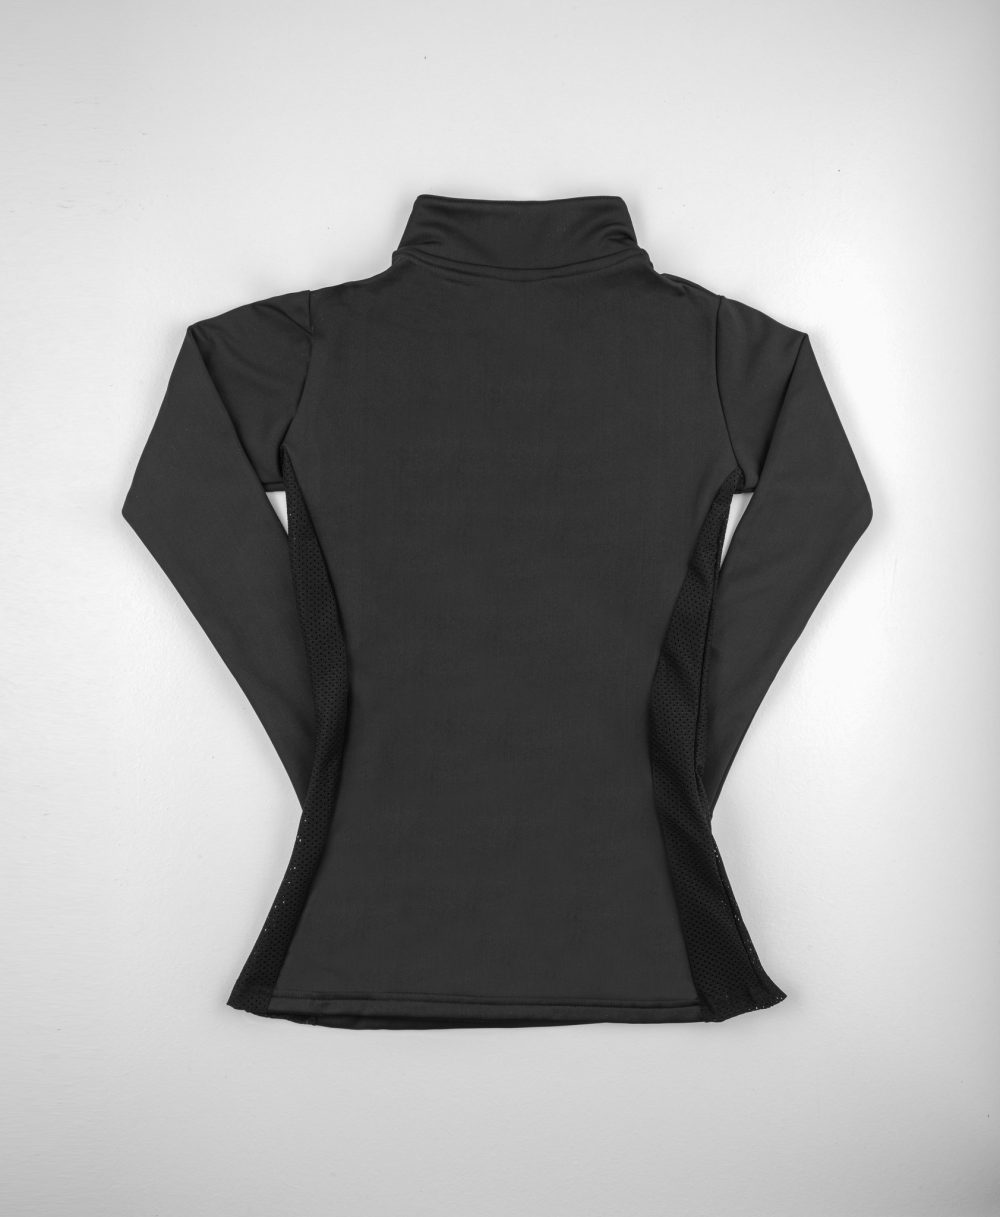 American Equus Technical Rider Wear - Black Label Base Layer Top